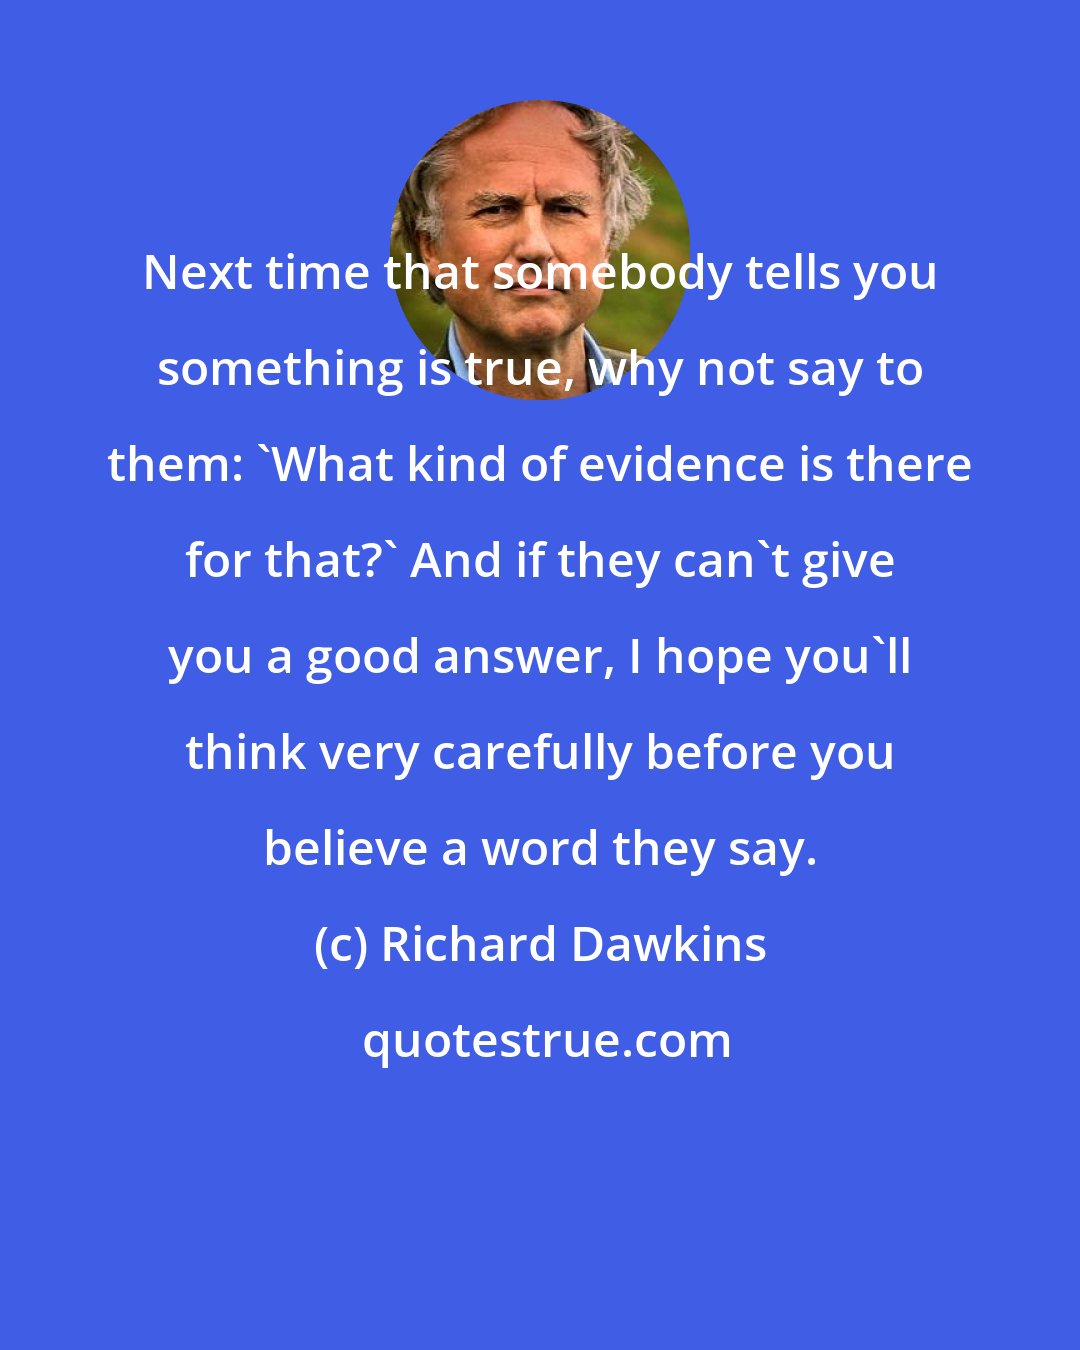 Richard Dawkins: Next time that somebody tells you something is true, why not say to them: 'What kind of evidence is there for that?' And if they can't give you a good answer, I hope you'll think very carefully before you believe a word they say.